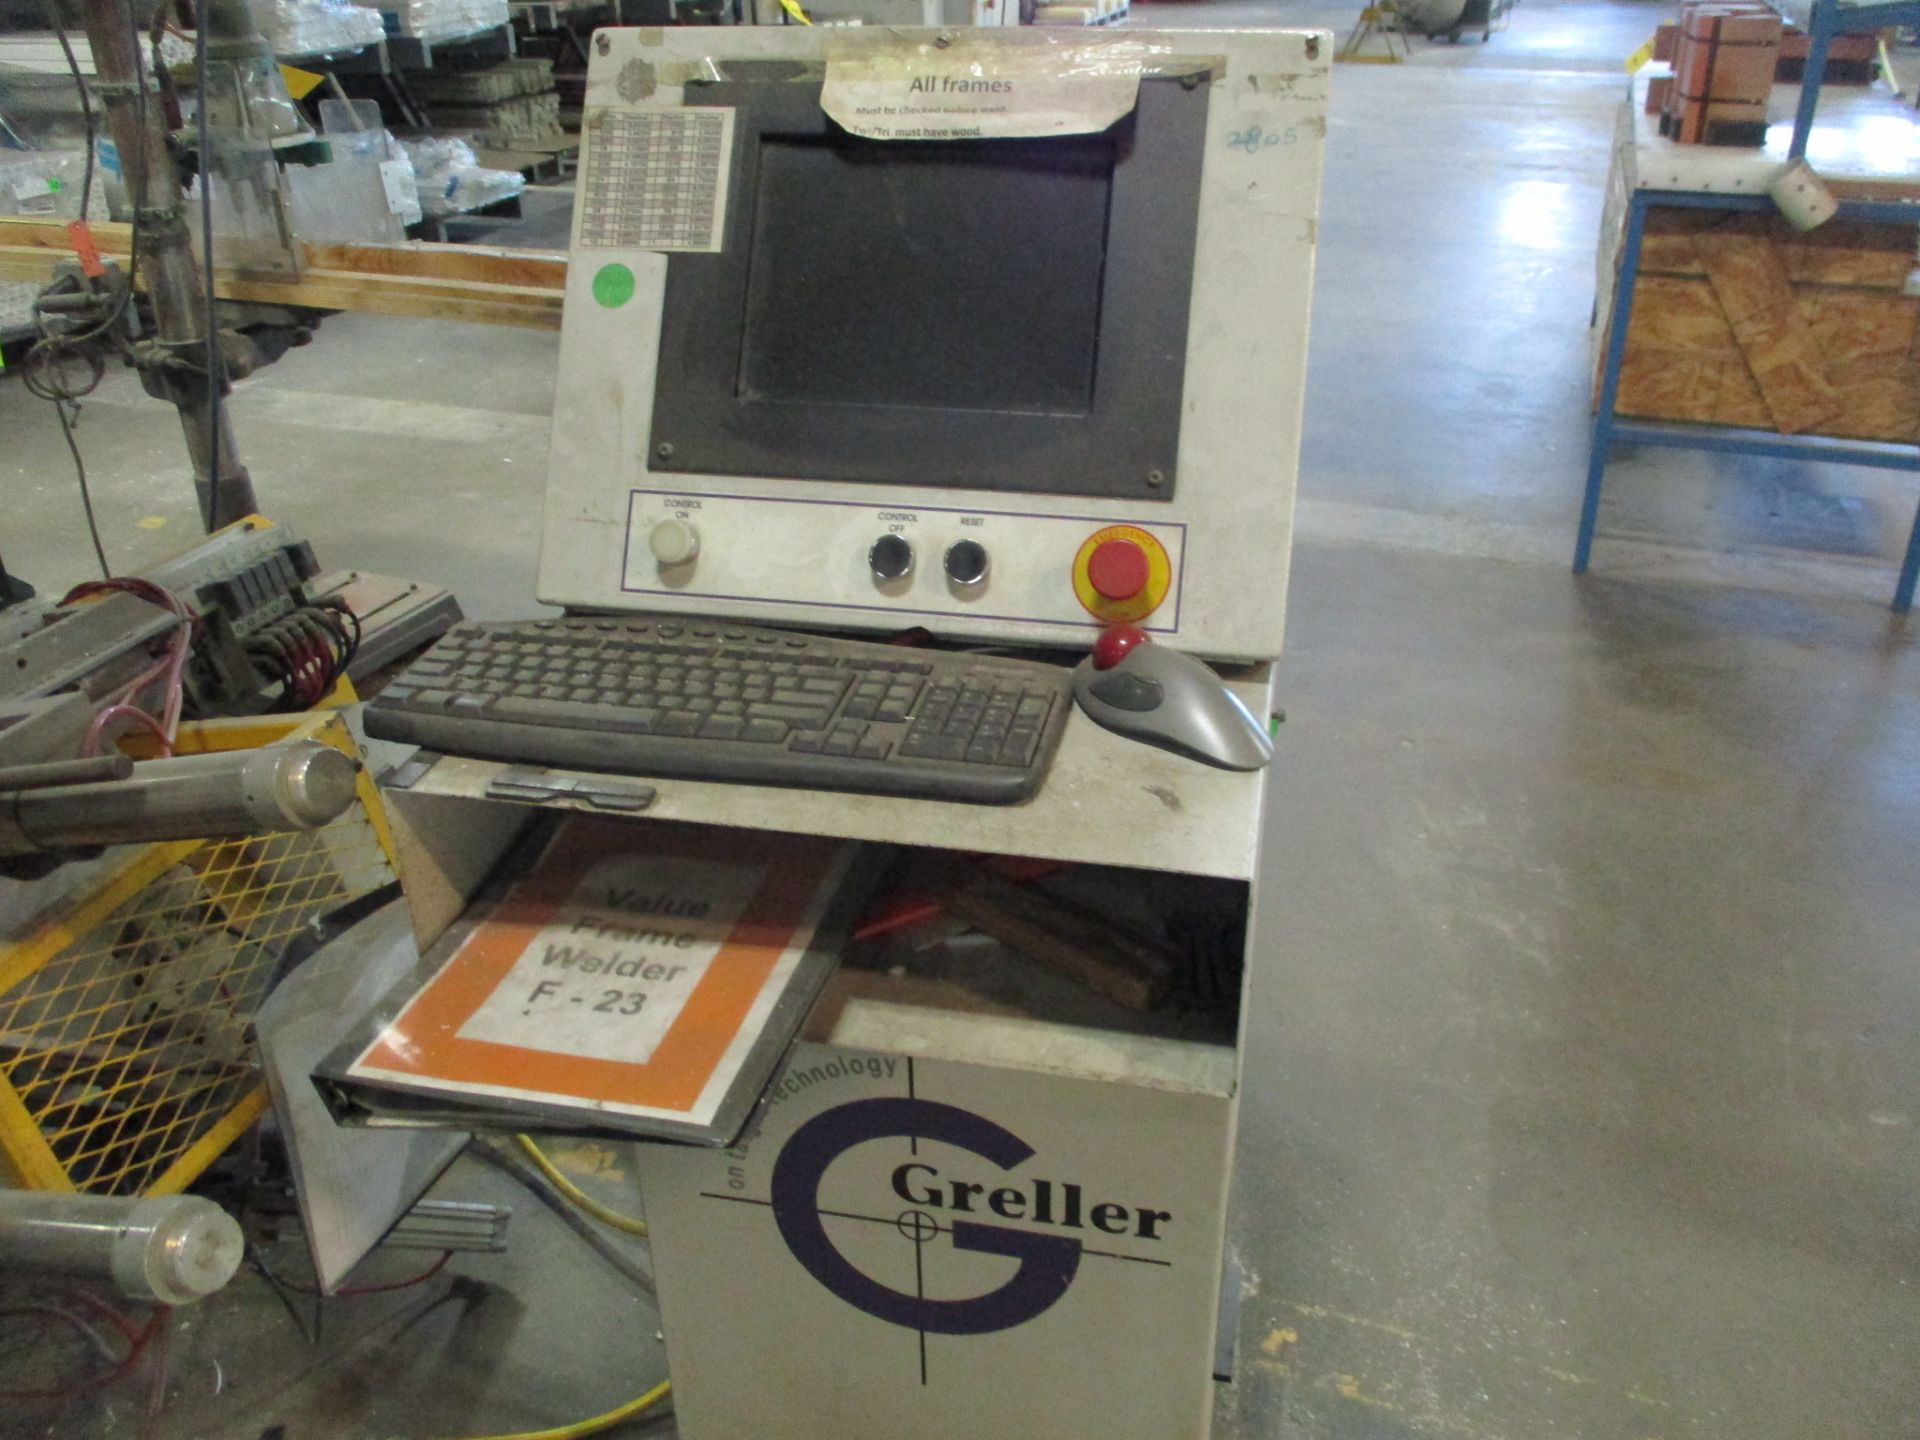 2004 Greller G400SE Automatic 4-Point Welder, s/n 1170, 120" Wide x 132" High Work Area, Foot Contro - Image 4 of 4